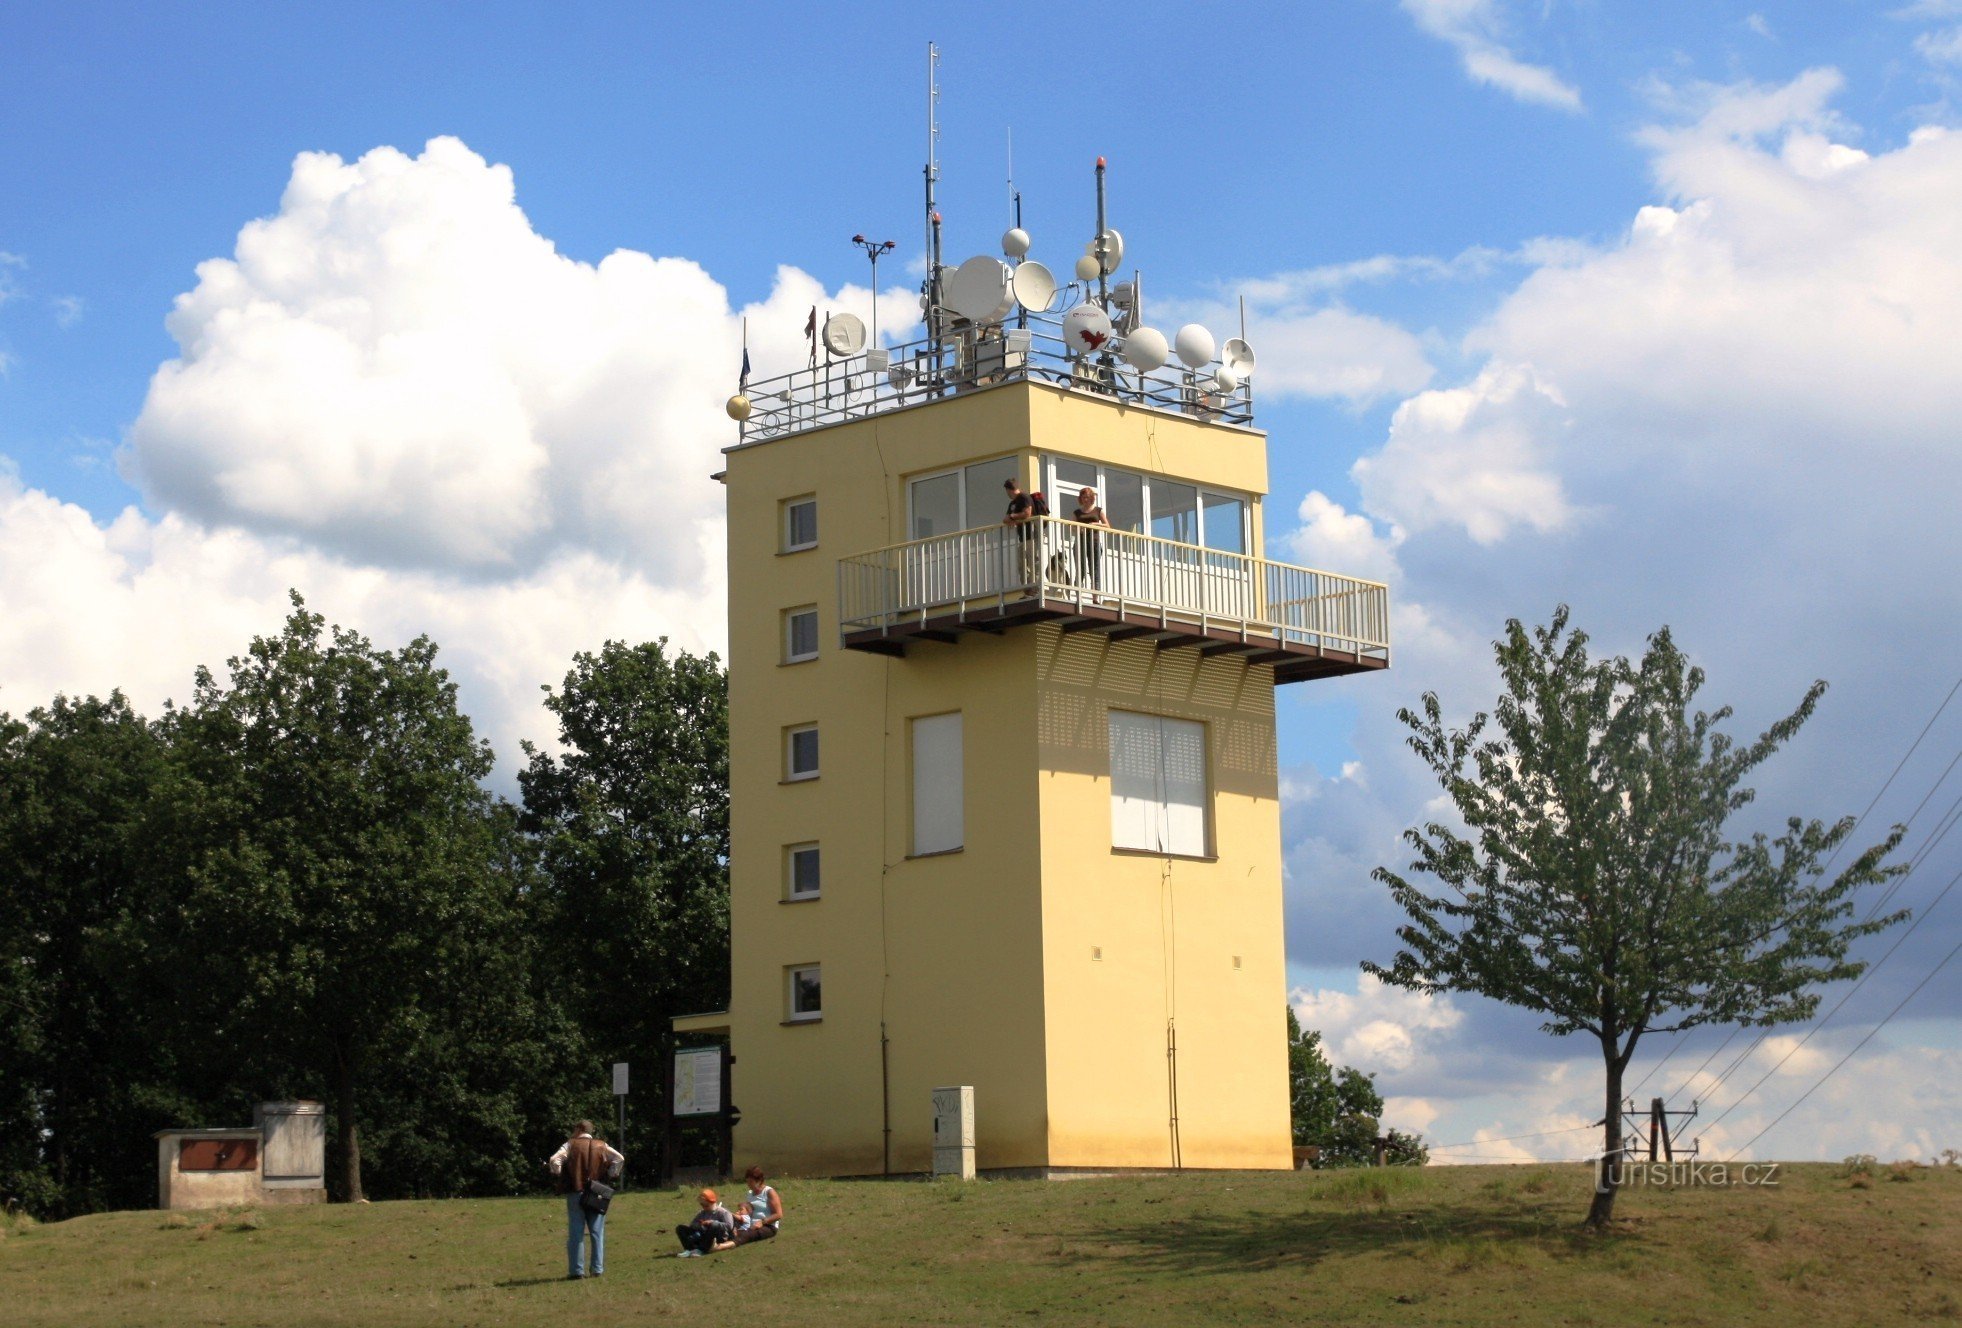 Zlobice - lookout tower